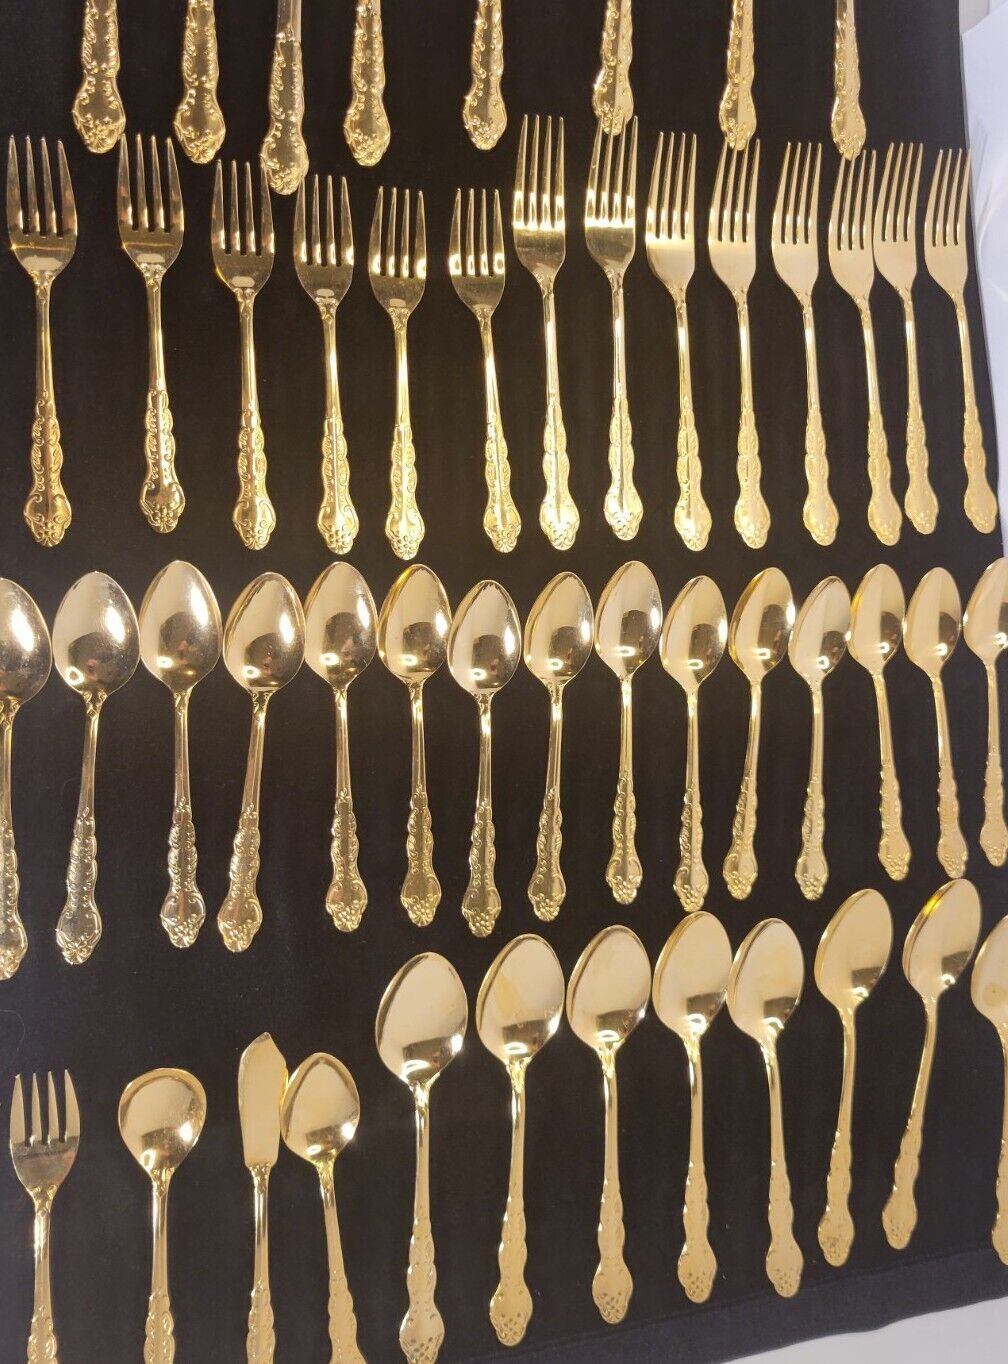 Antique 50 Piece Golden Silver Ware Set From Japan